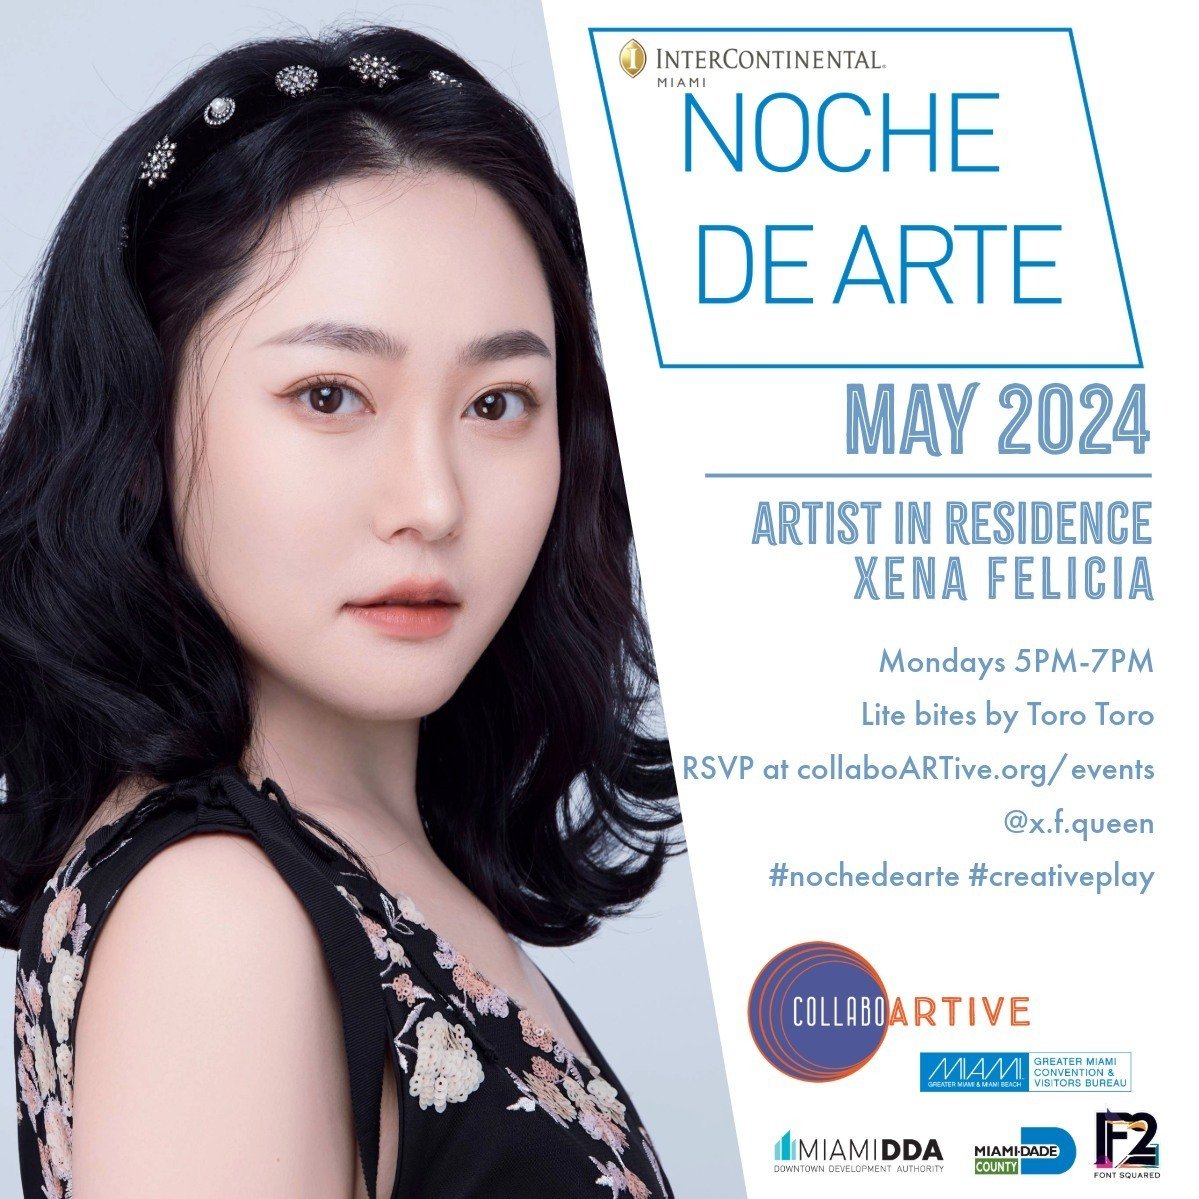 Just like life, April ends with openings and closings, endings and new beginnings. Monday Noche de Arte welcomes @x.f.queen Xena Felicia to the Gallery Lounge. On Tuesday, we say farewell to Green Library's exhibition Papel Deux. Both events promise 